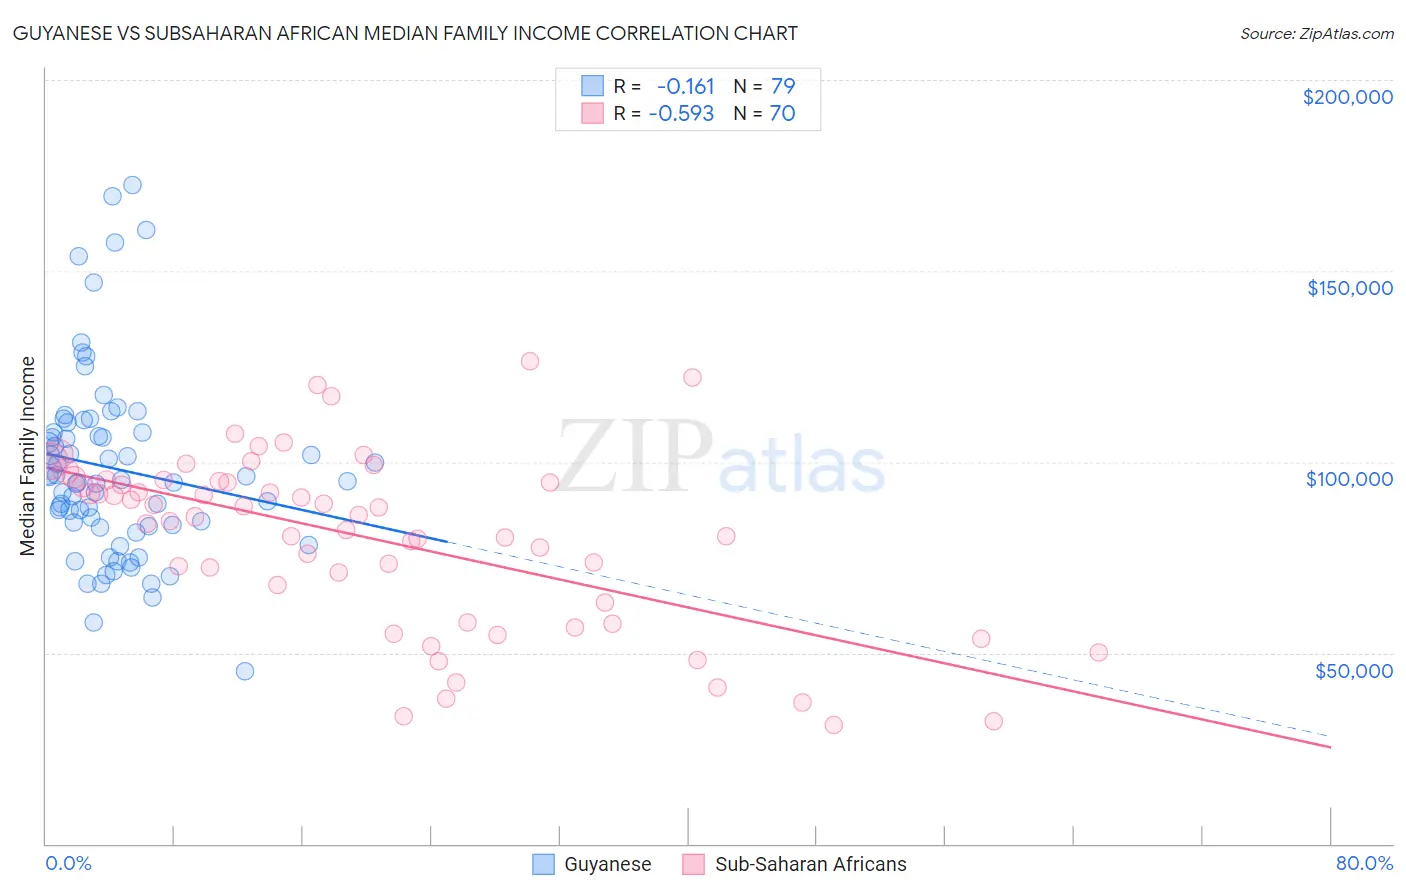 Guyanese vs Subsaharan African Median Family Income